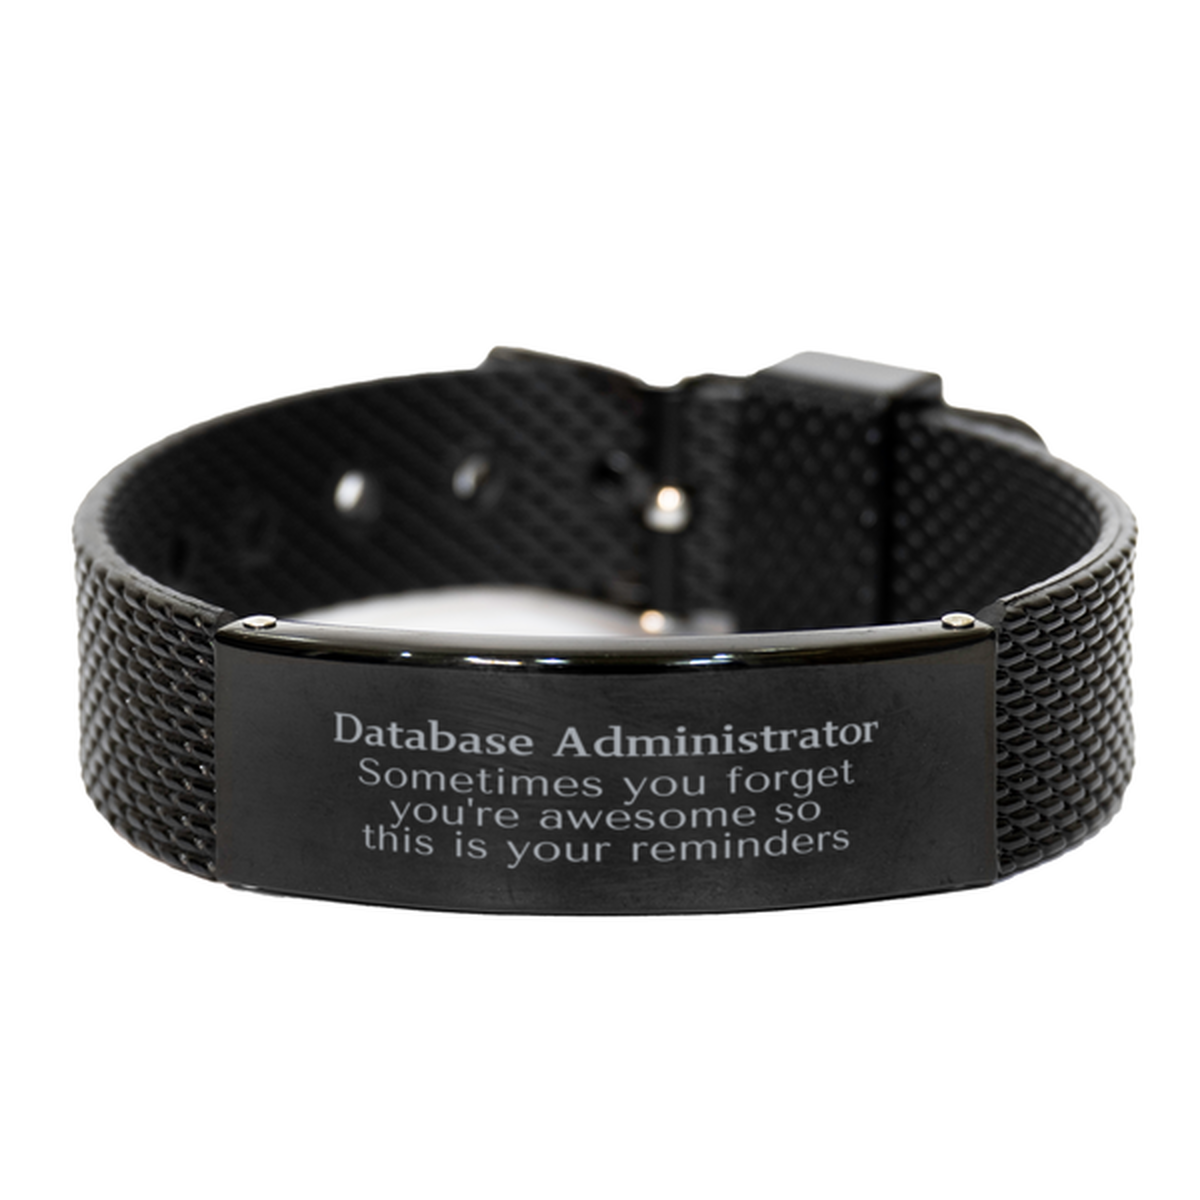 Sentimental Database Administrator Black Shark Mesh Bracelet, Database Administrator Sometimes you forget you're awesome so this is your reminders, Graduation Christmas Birthday Gifts for Database Administrator, Men, Women, Coworkers